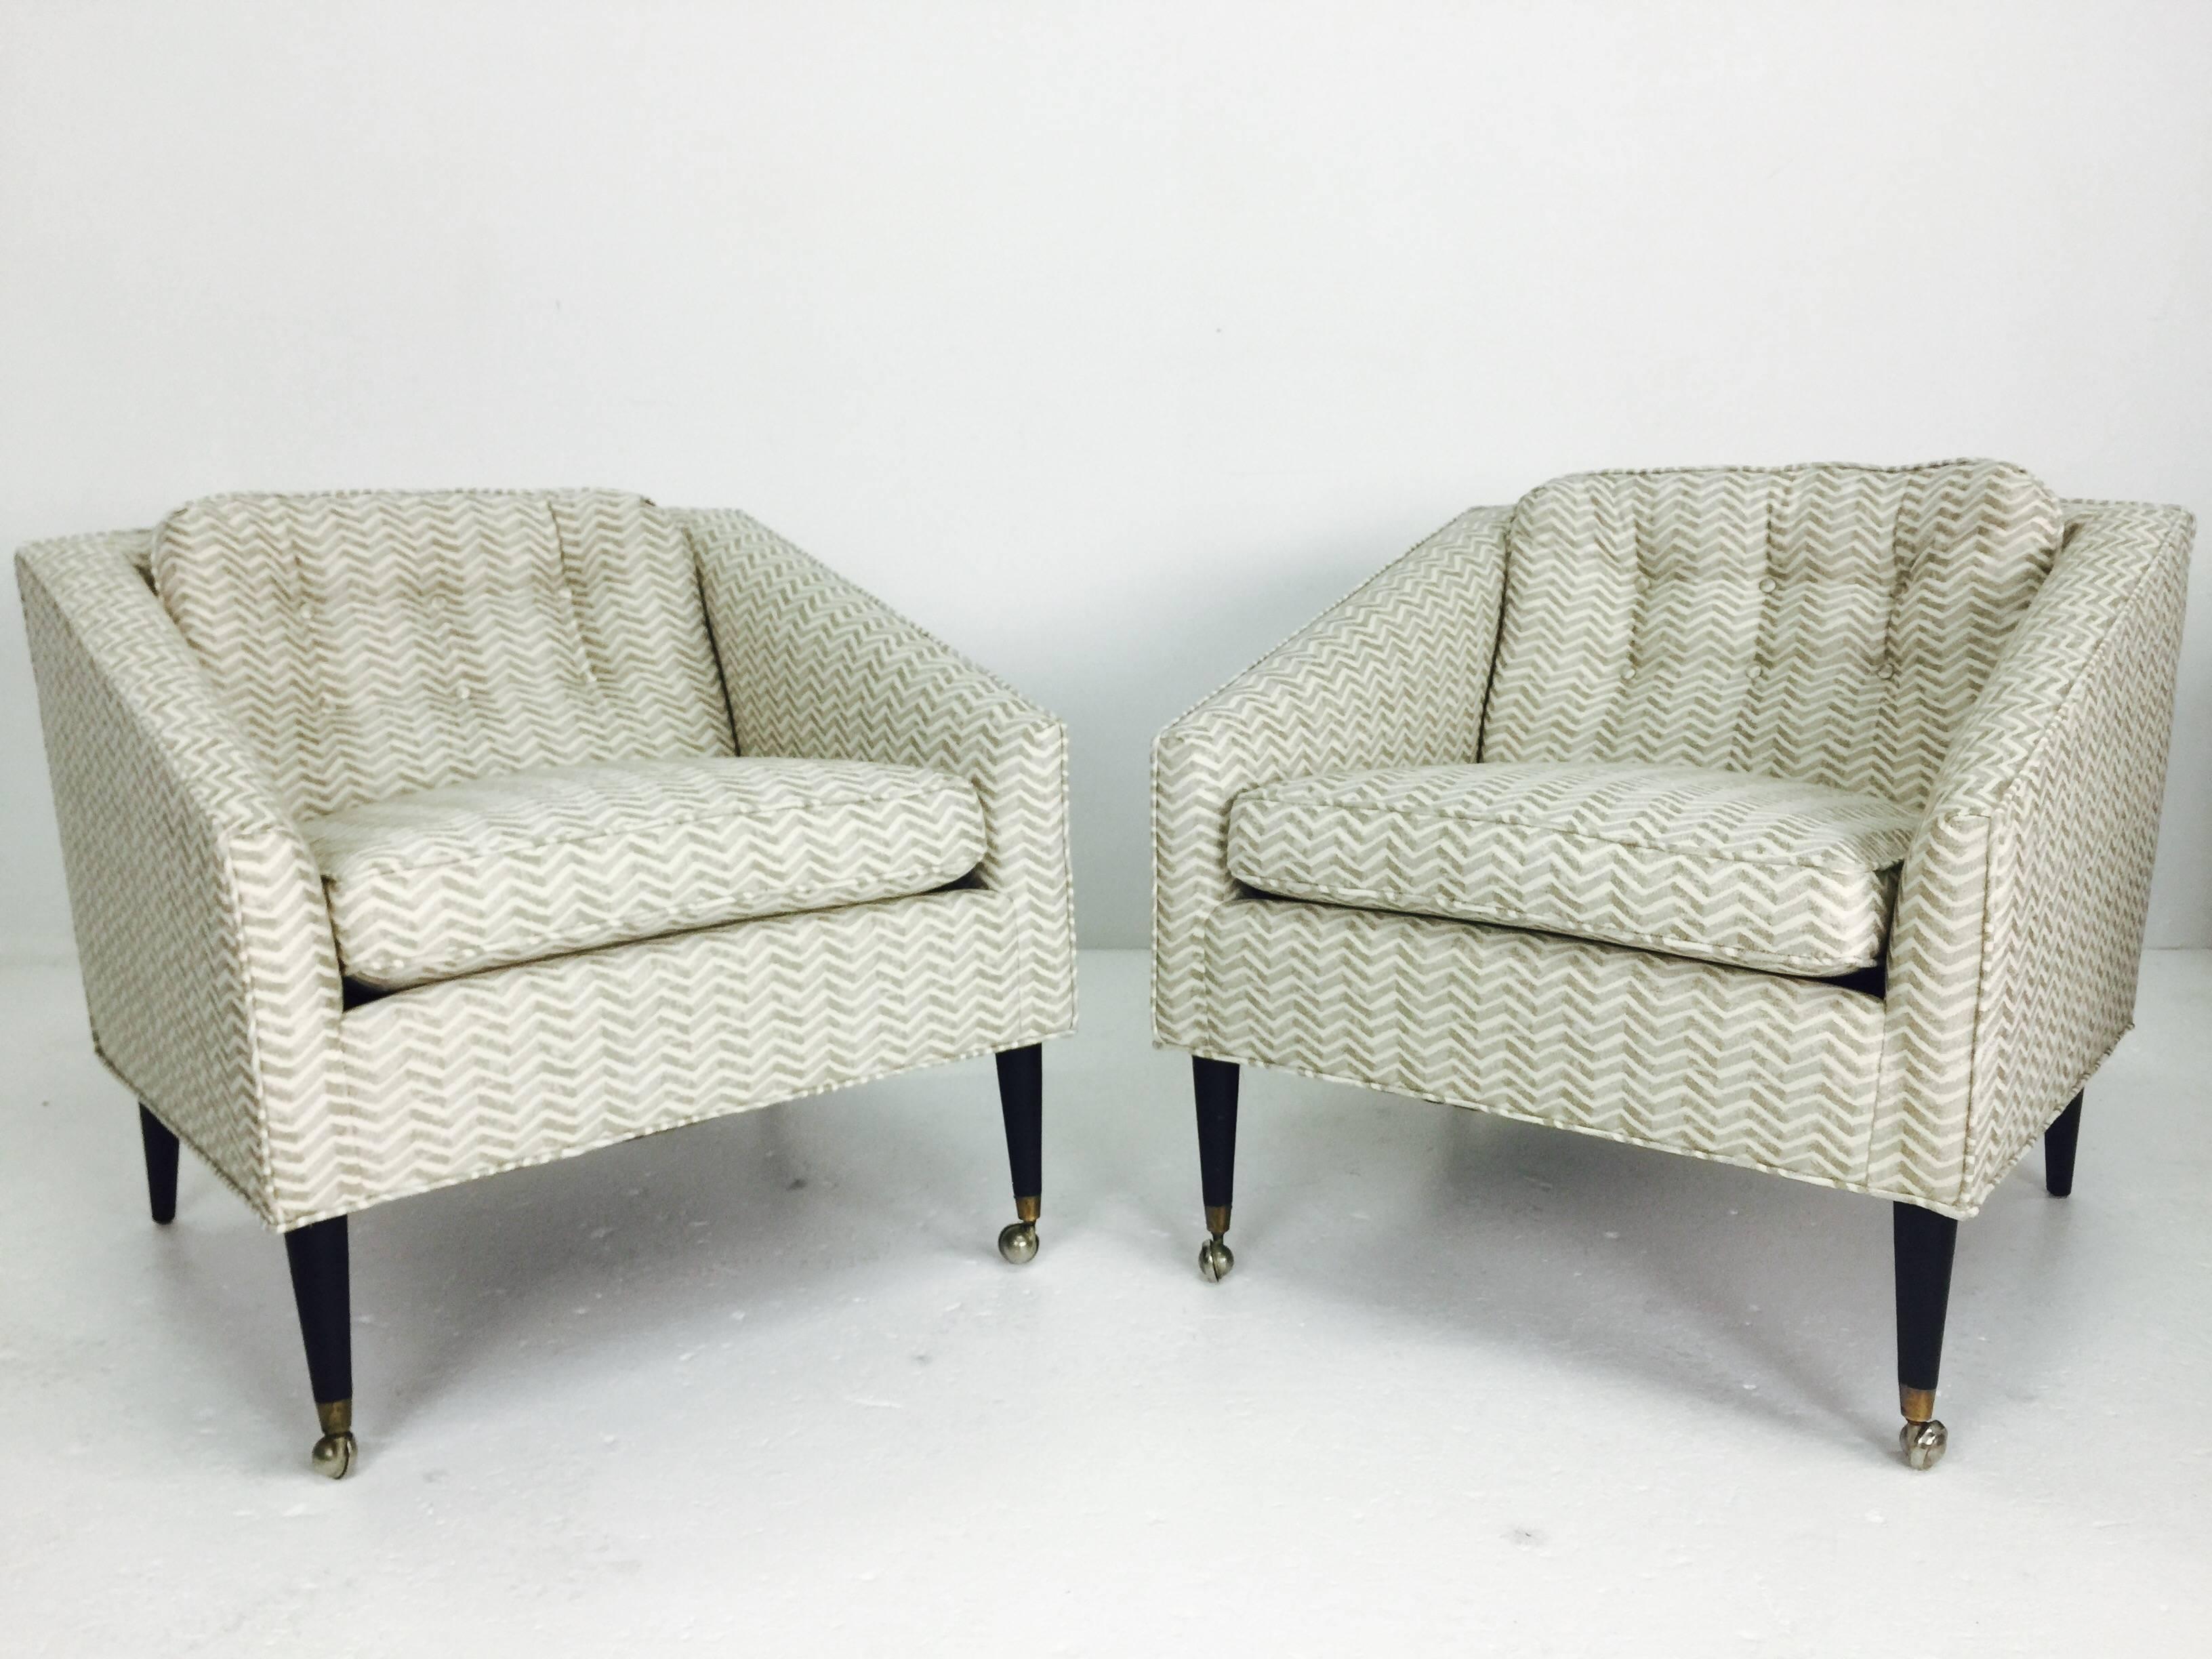 Newly reupholstered with herringbone pattern fabric and espresso leg finish.

Dimensions: 27.5